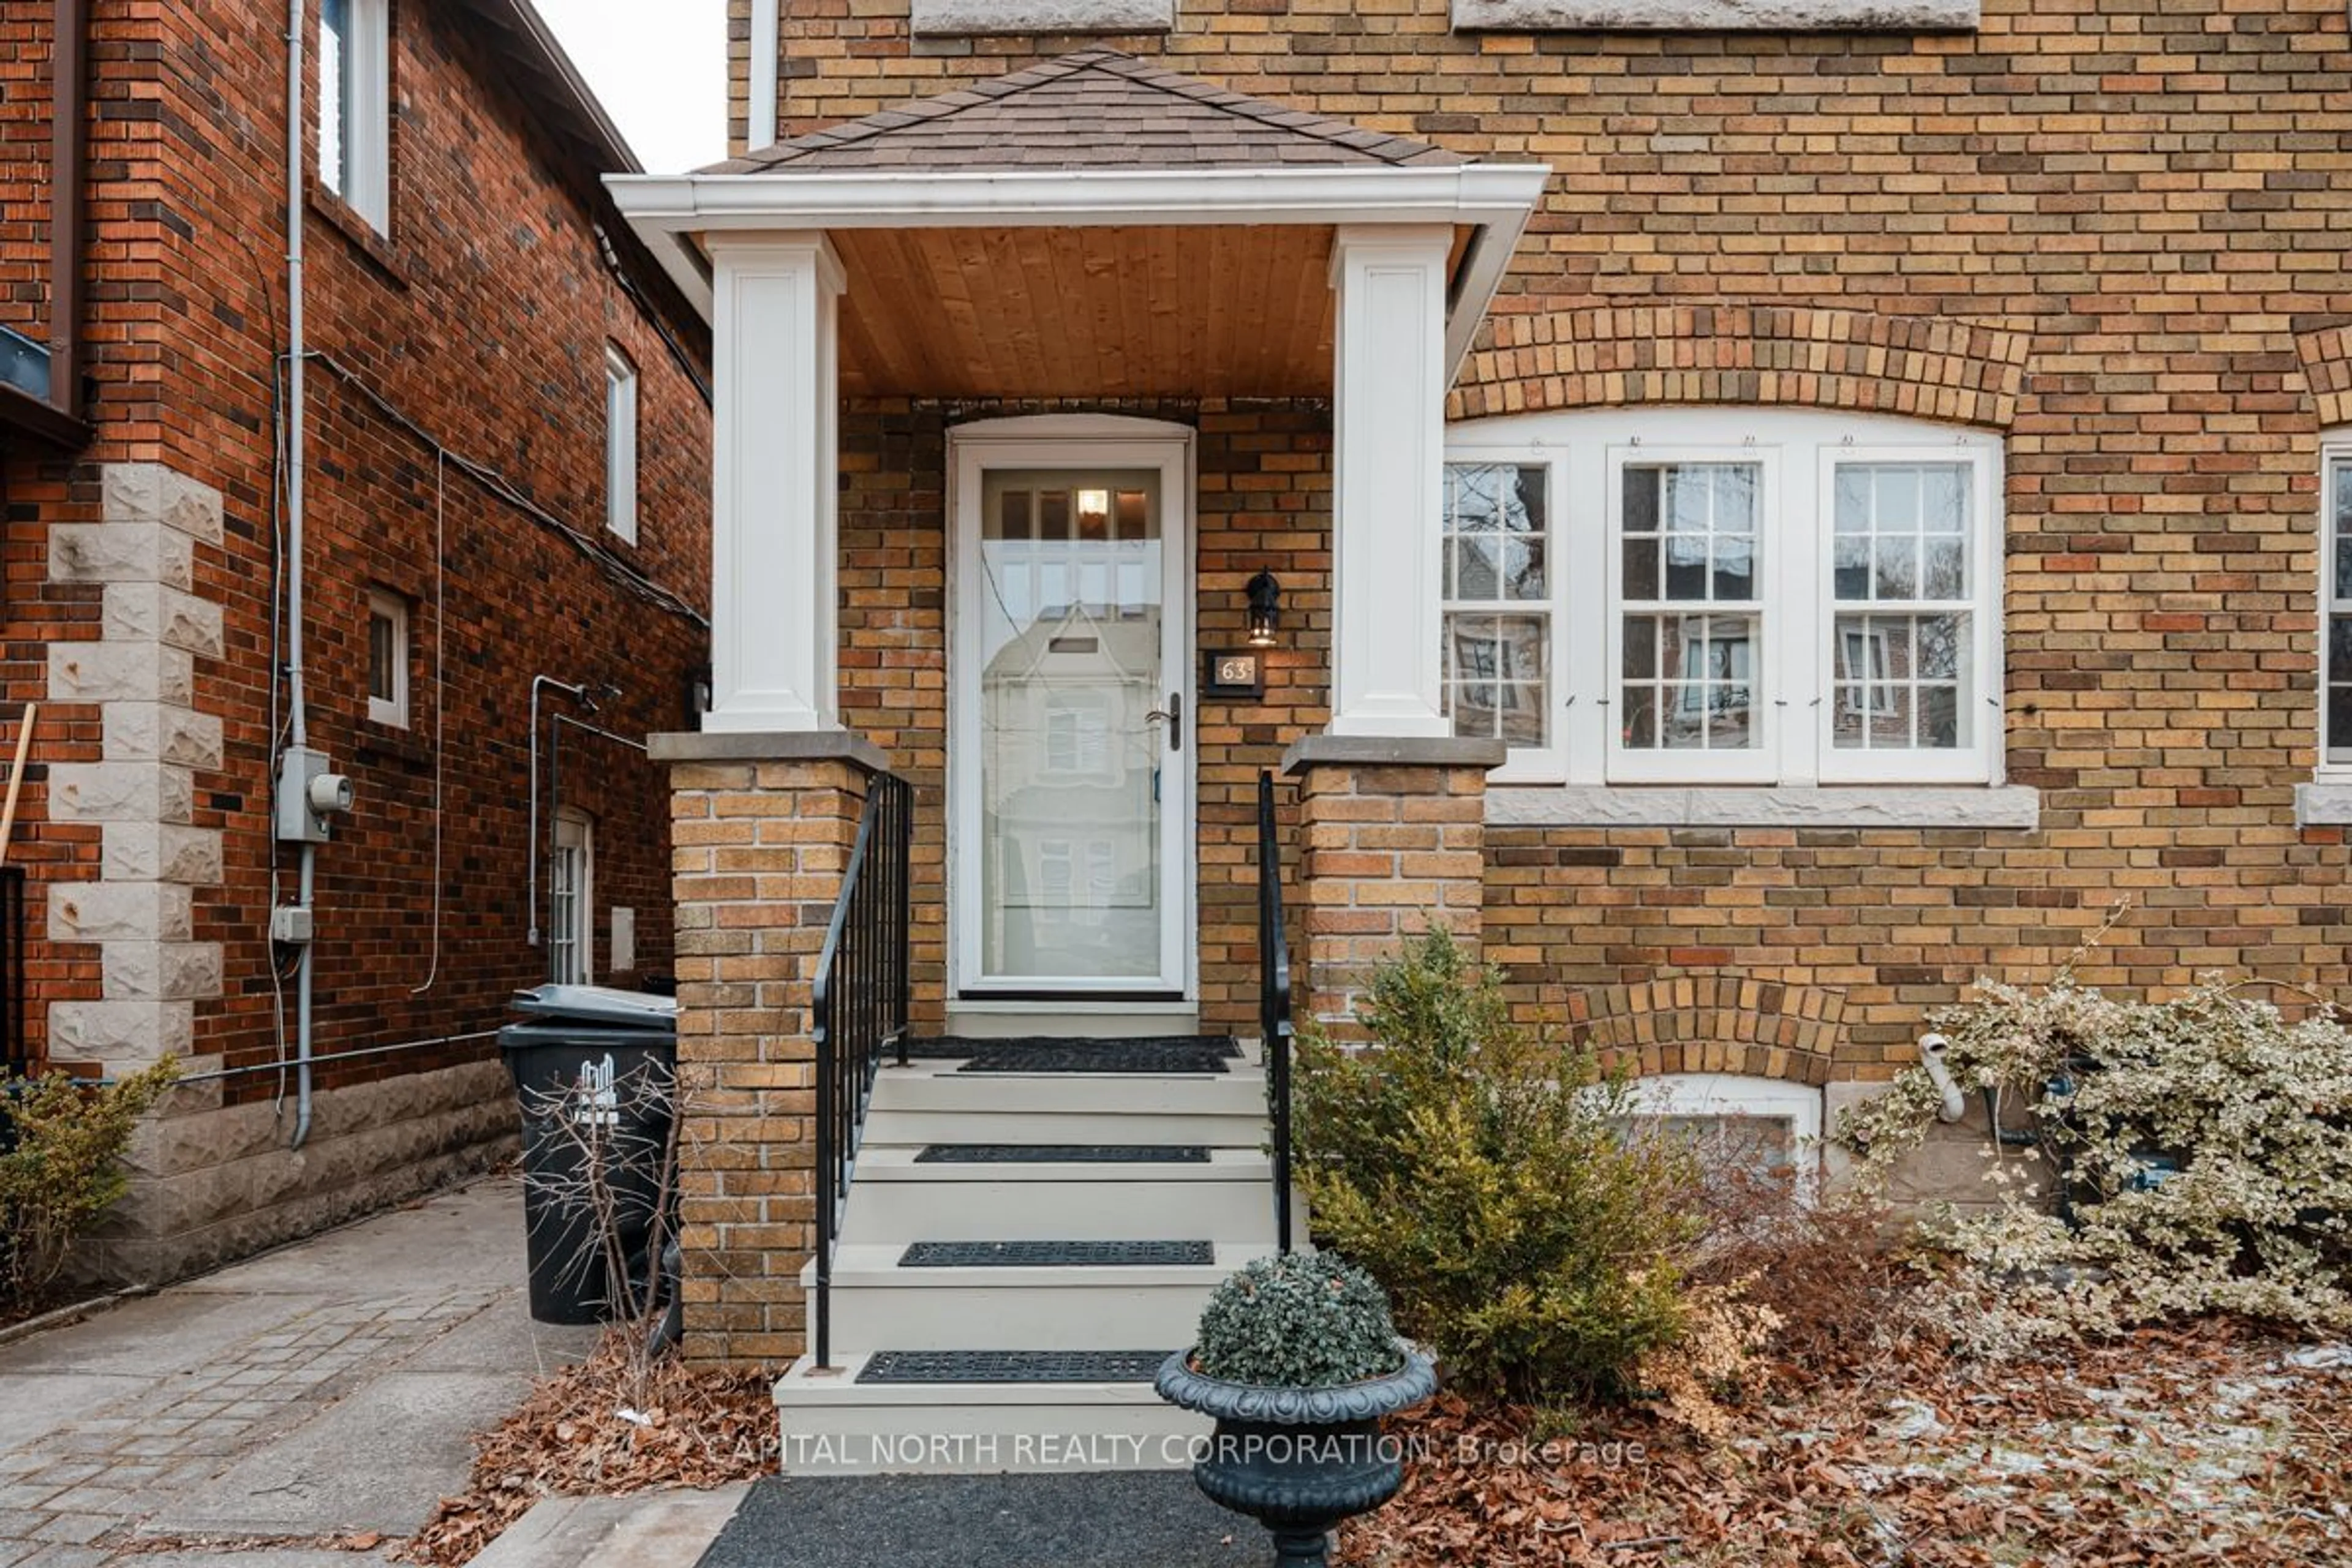 Home with brick exterior material for 63 Glengarry Ave, Toronto Ontario M5M 1C8